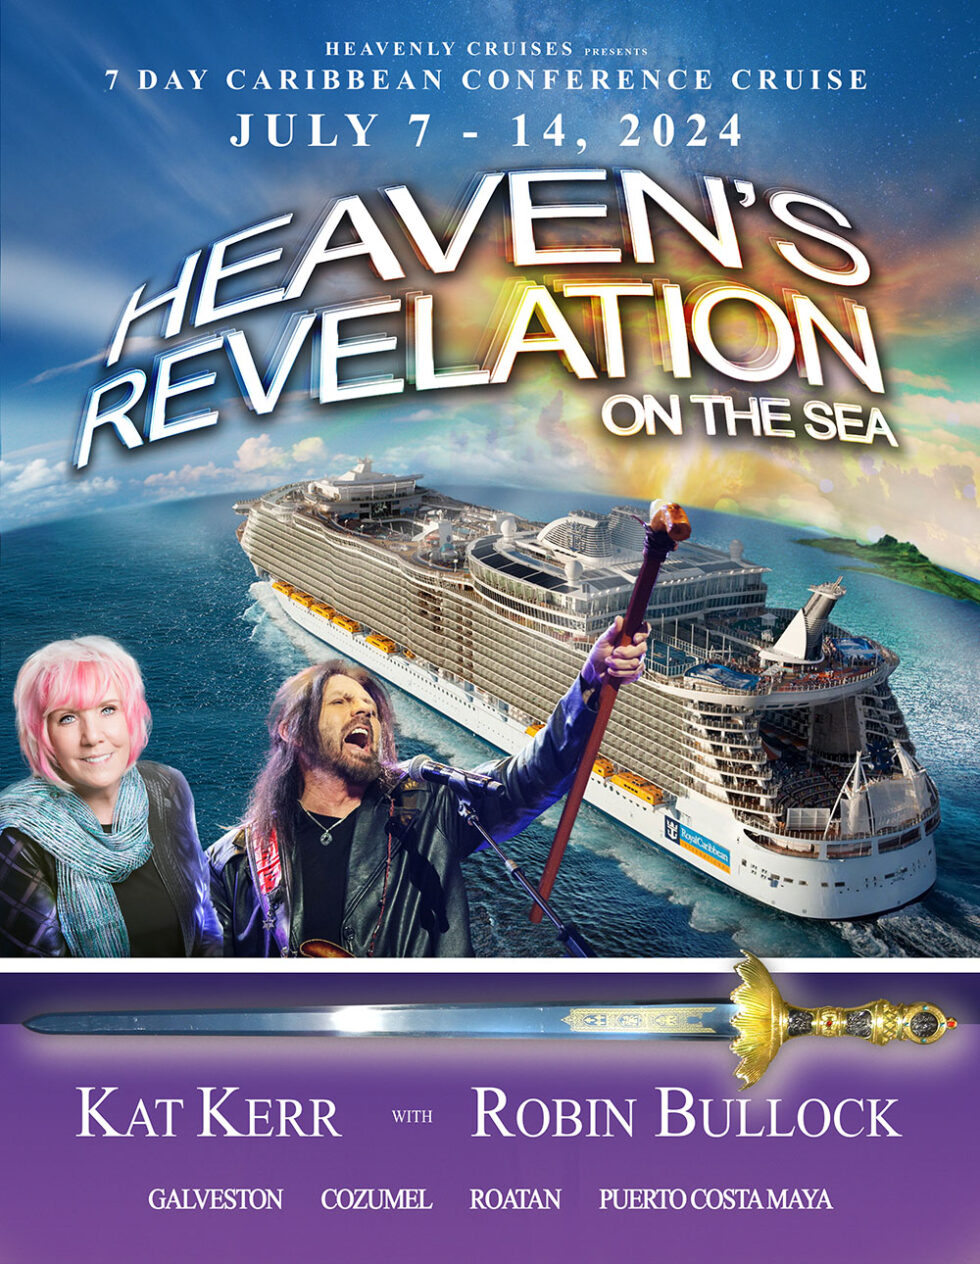 2024 Cruise with Kat Kerr and Robin Bullock